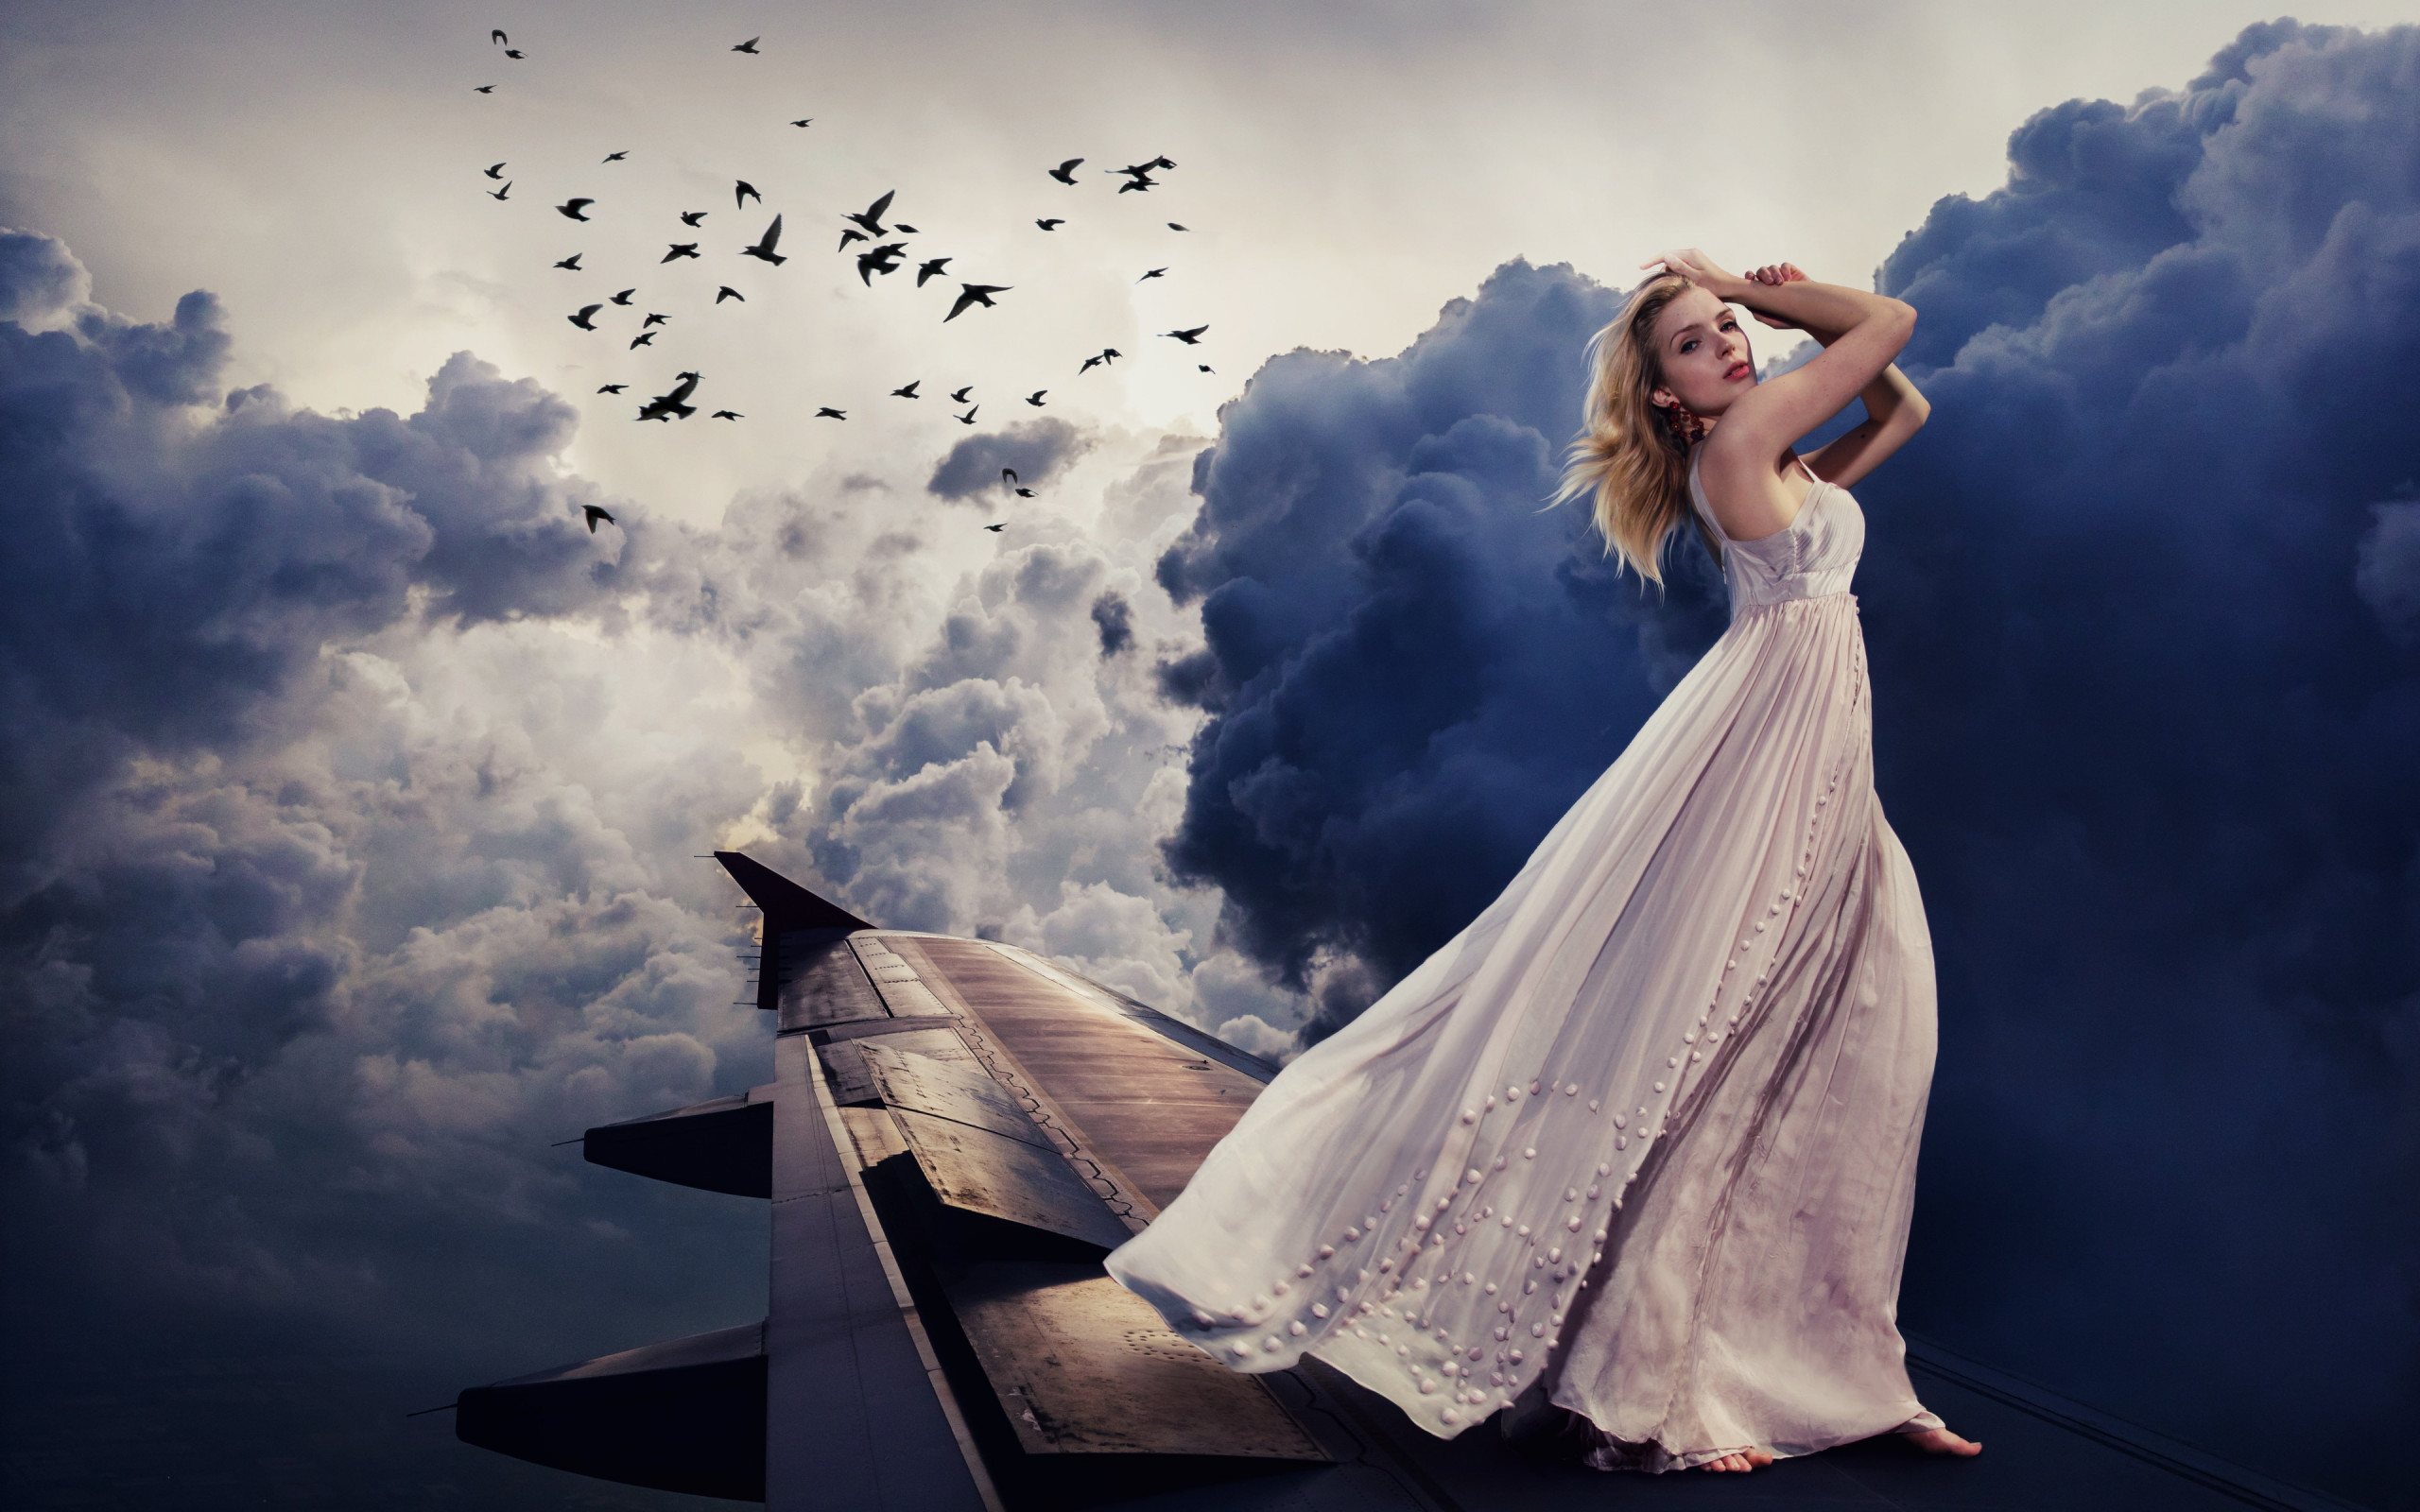 Beautiful girl on the airplane wing wallpaper 2560x1600